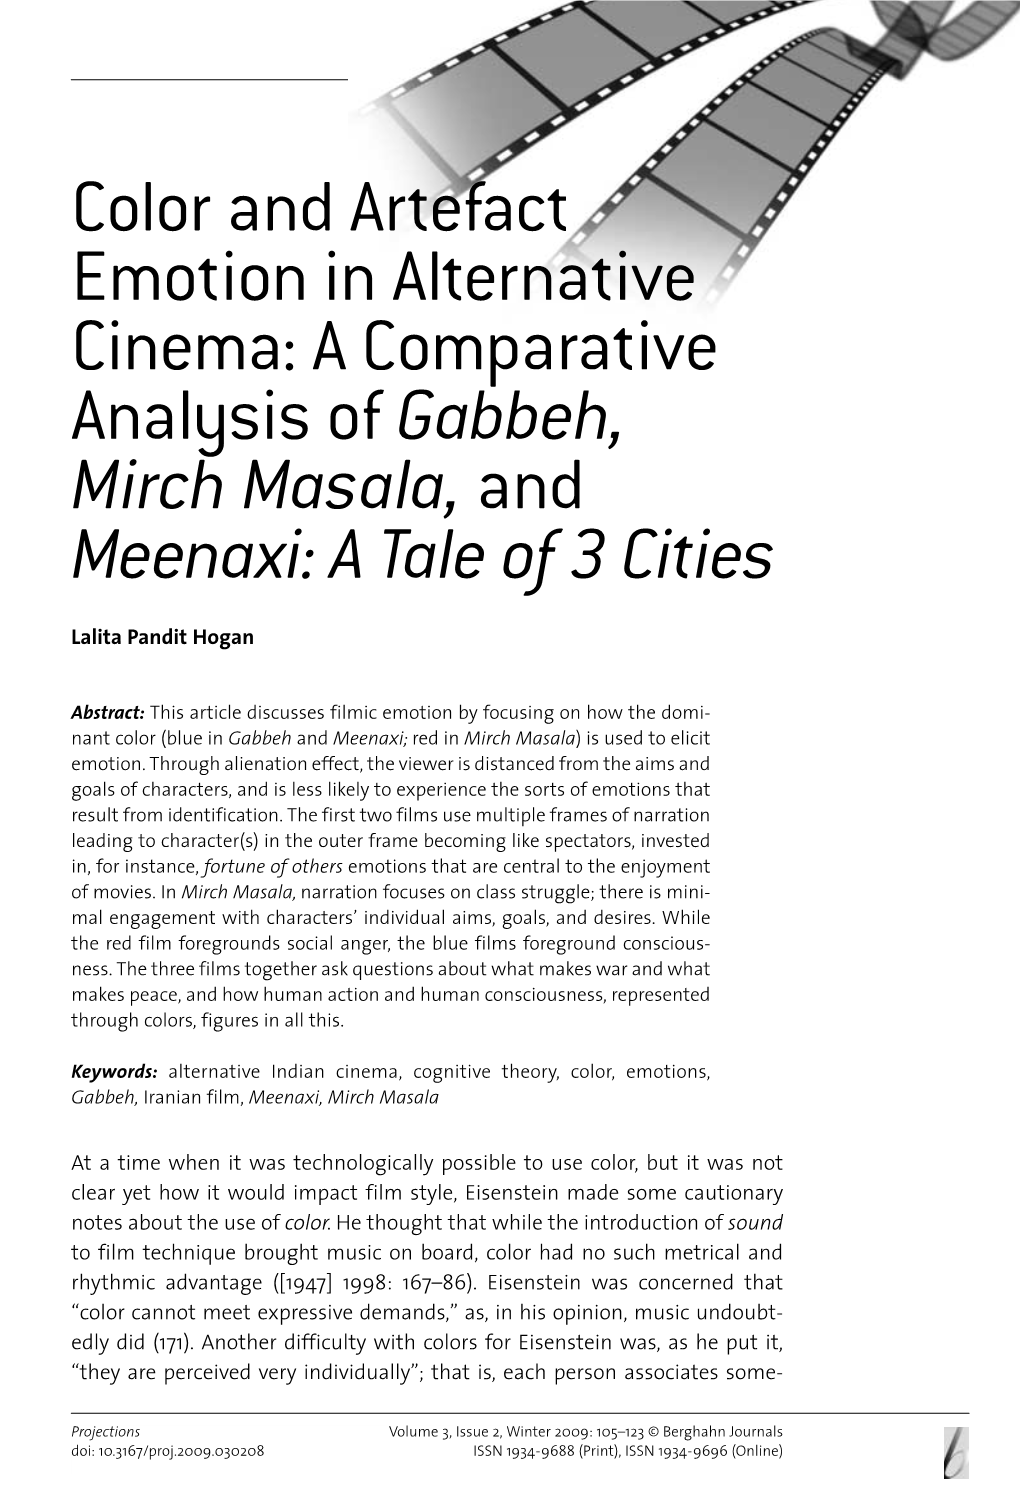 Color and Artefact Emotion in Alternative Cinema: a Comparative Analysis of Gabbeh, Mirch Masala, and Meenaxi: a Tale of 3 Cities